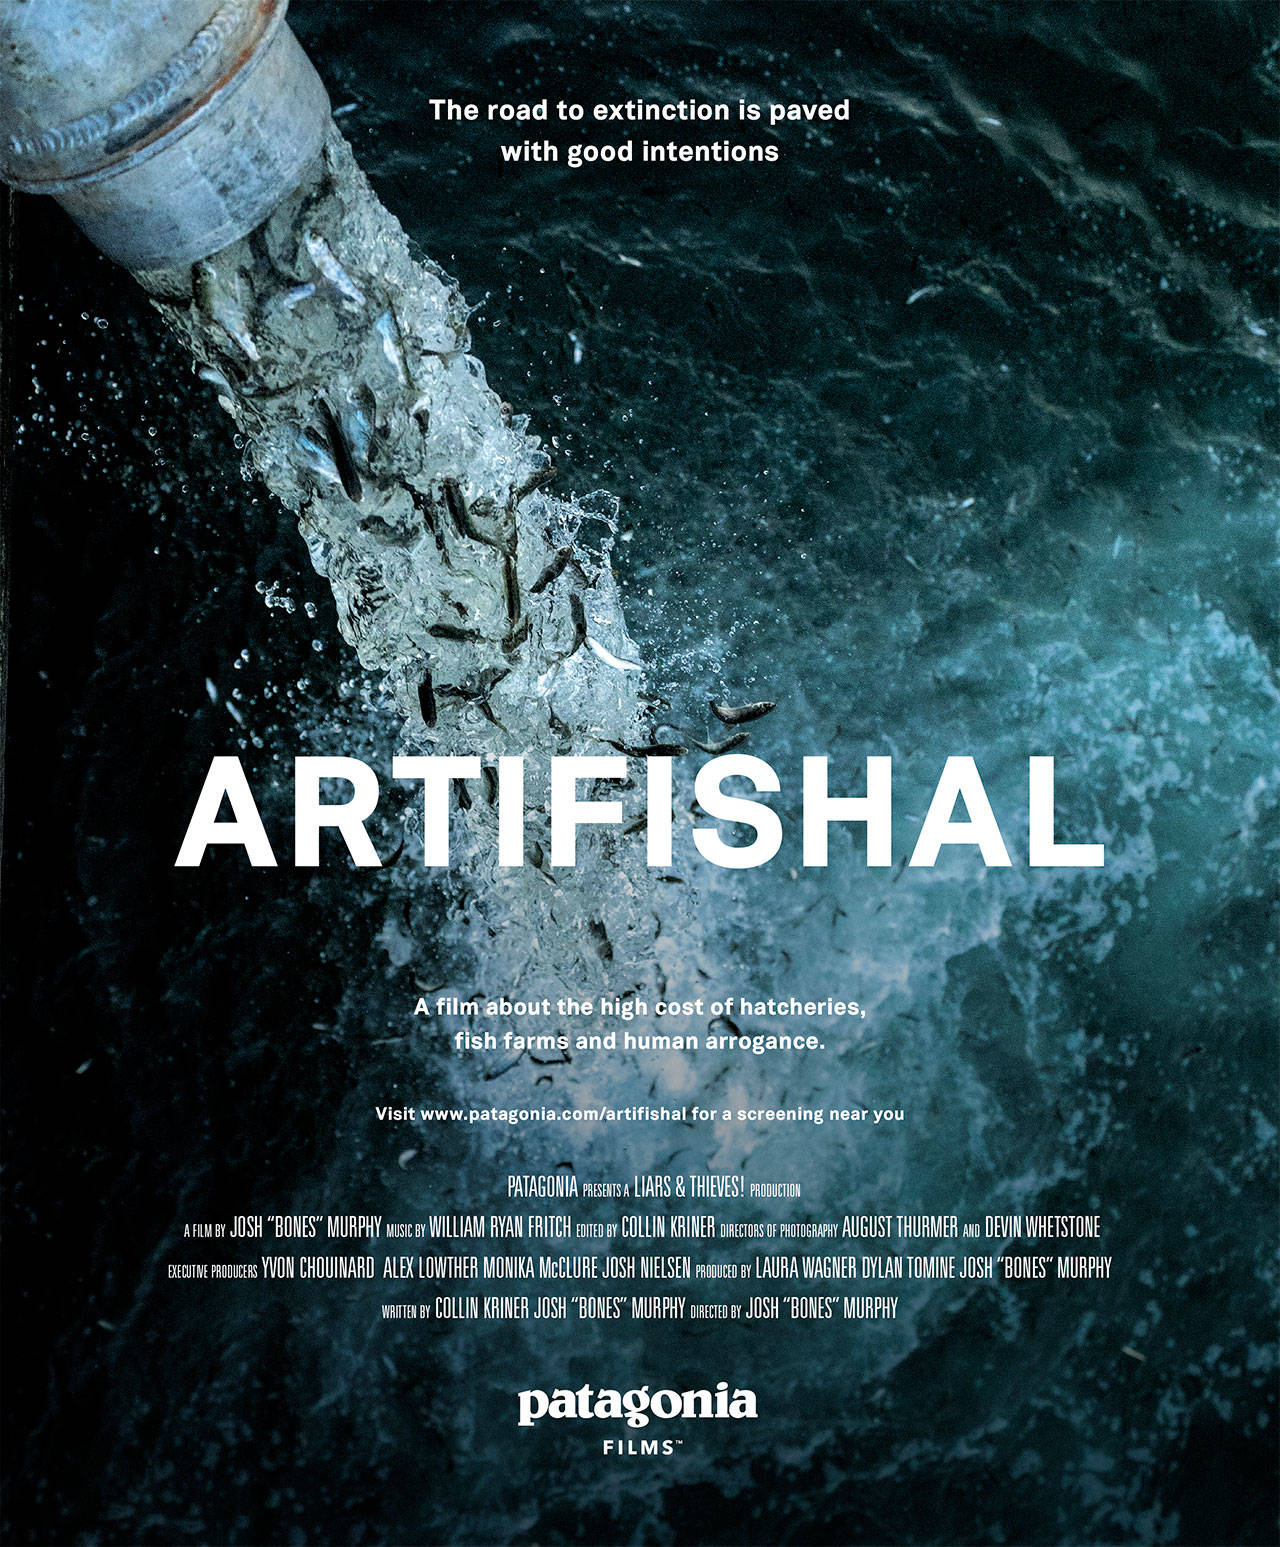 Image courtesy of courtesy of Dylan Tomine | “Artifishal” will play at 7 p.m. at the Lynwood Theatre on Thursday, Nov. 7. Admission is free with a reservation.